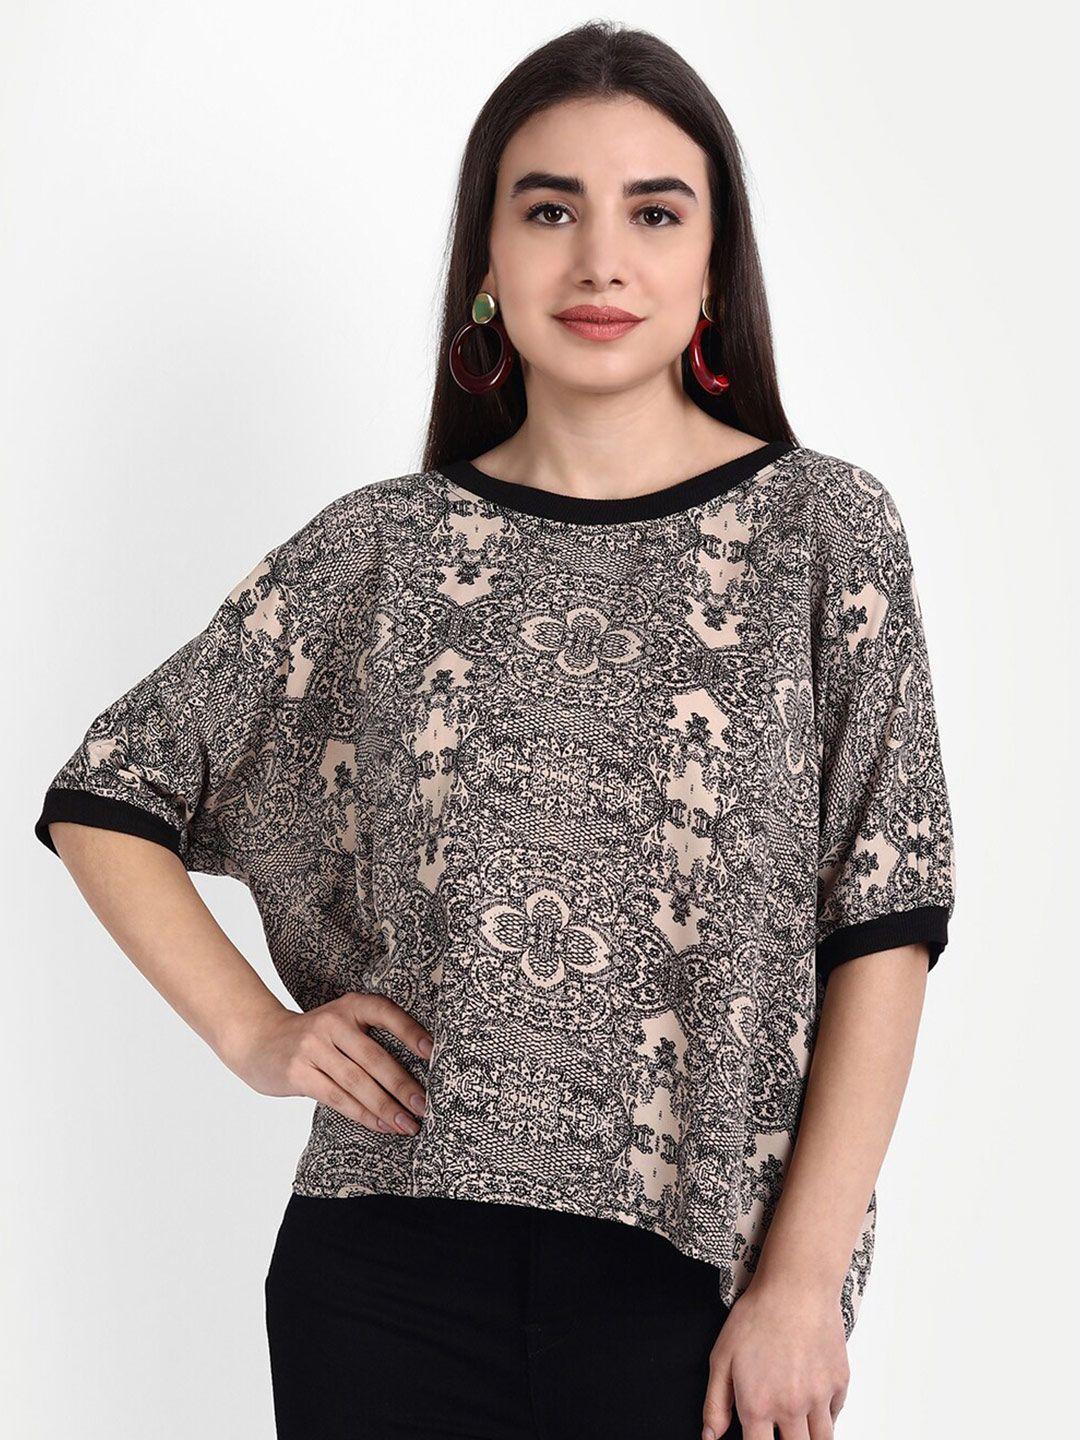 rediscover fashion beige floral print free size rib top